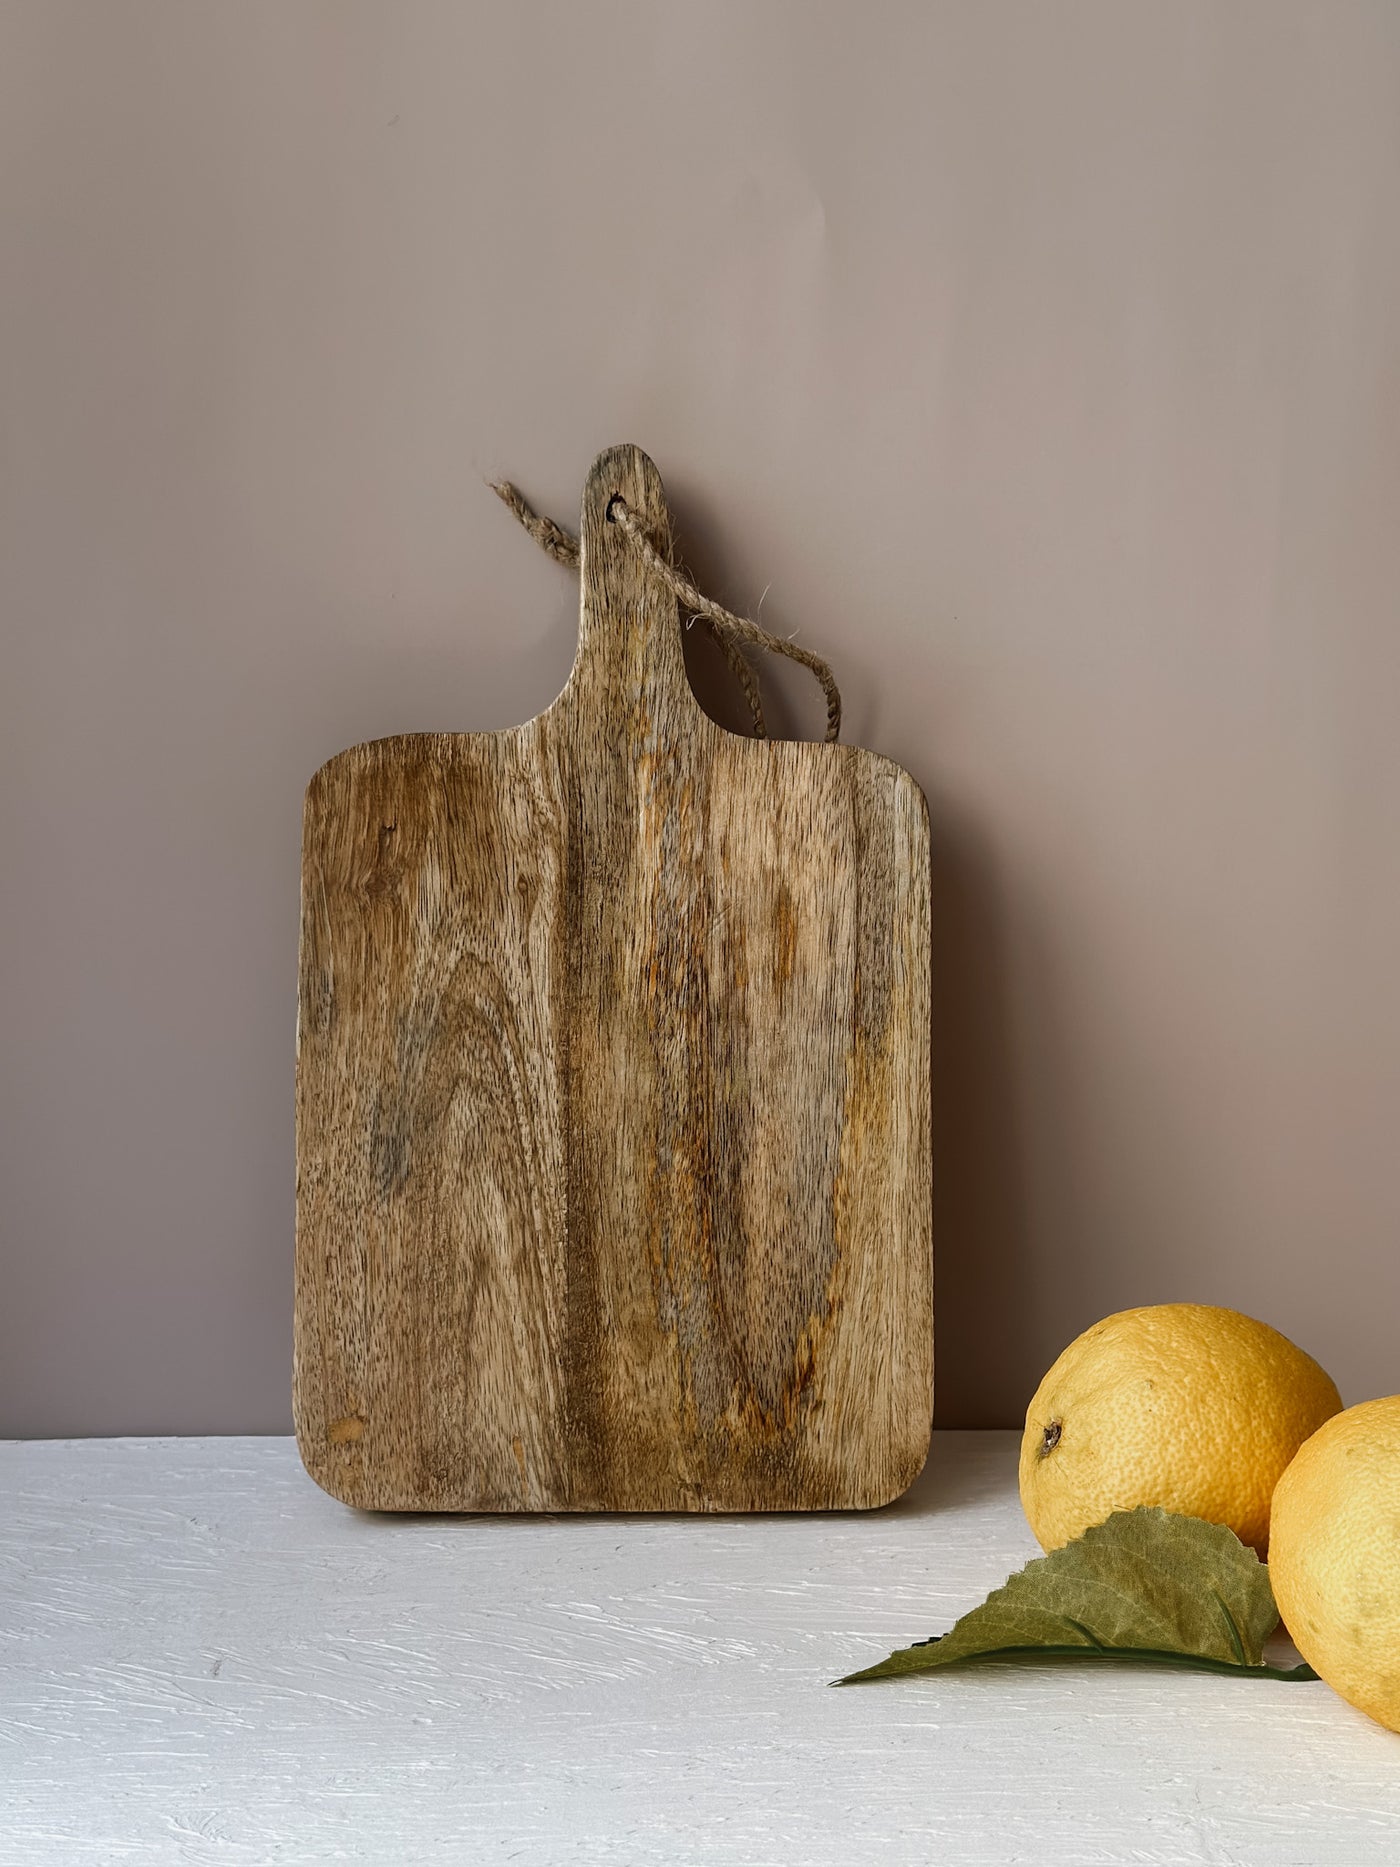 Small Wooden cutting board